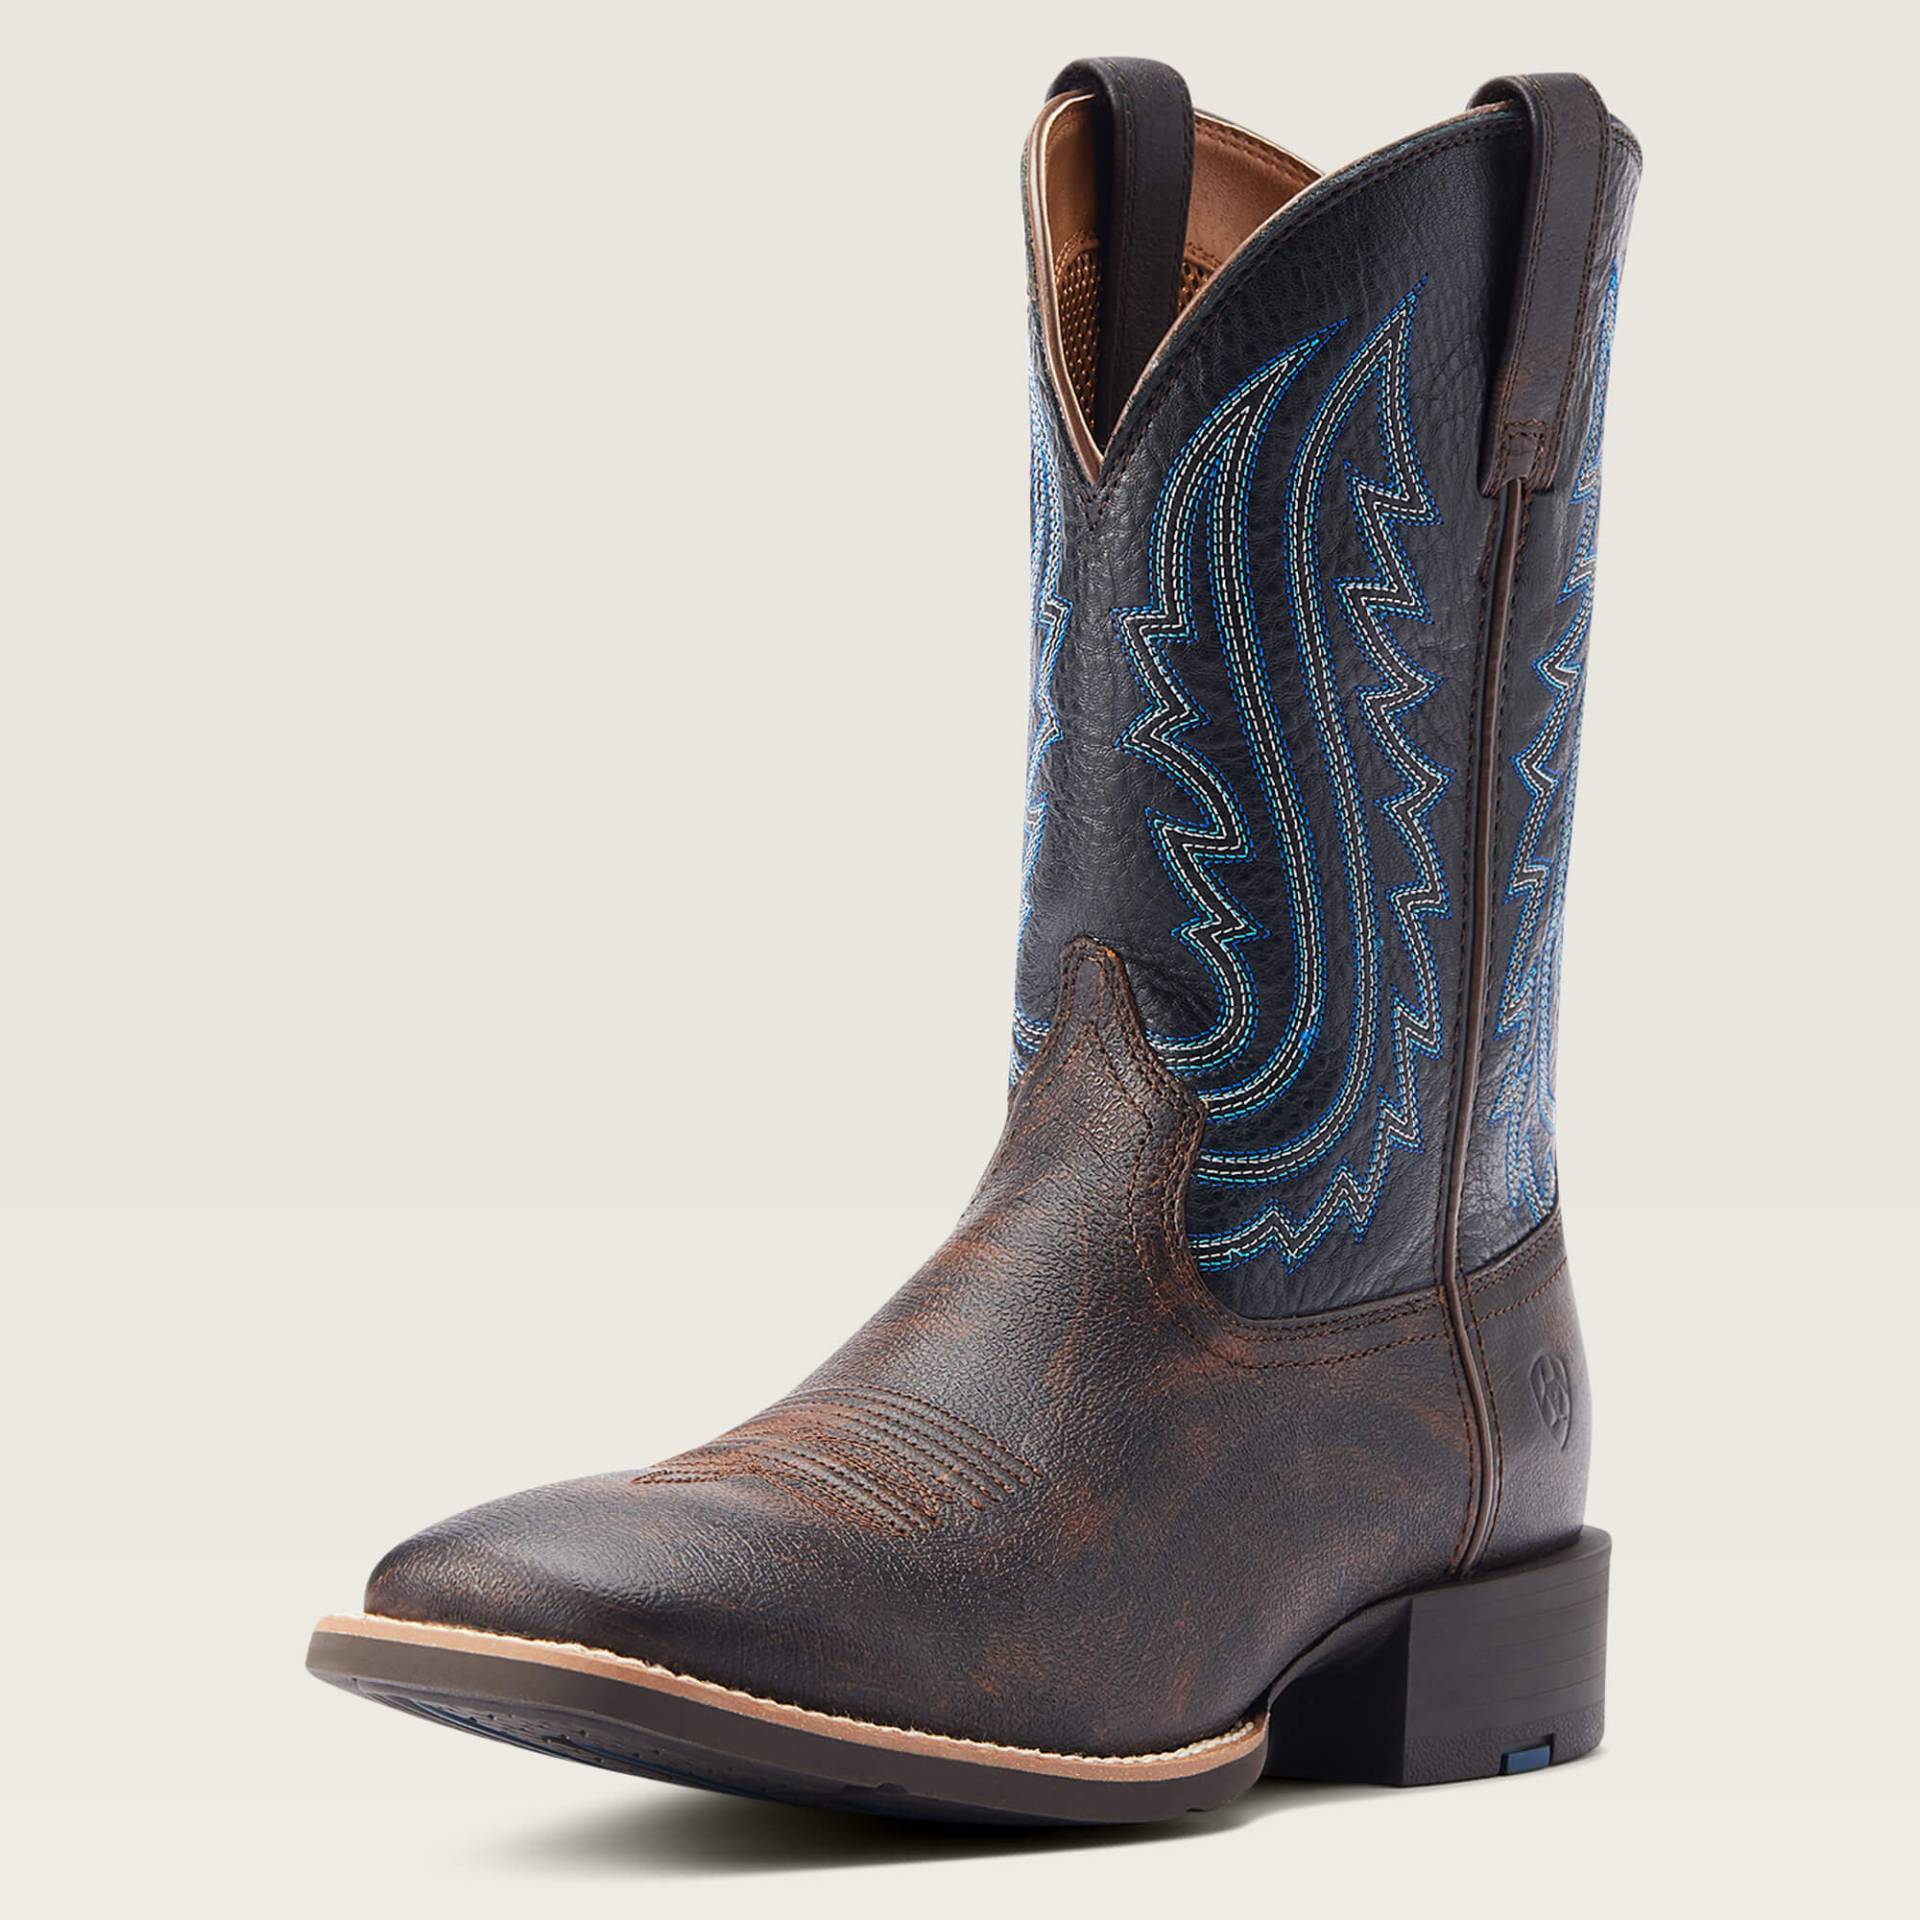 Ariat Sport Big Country Western Boots | Rugged Cowboy Boots